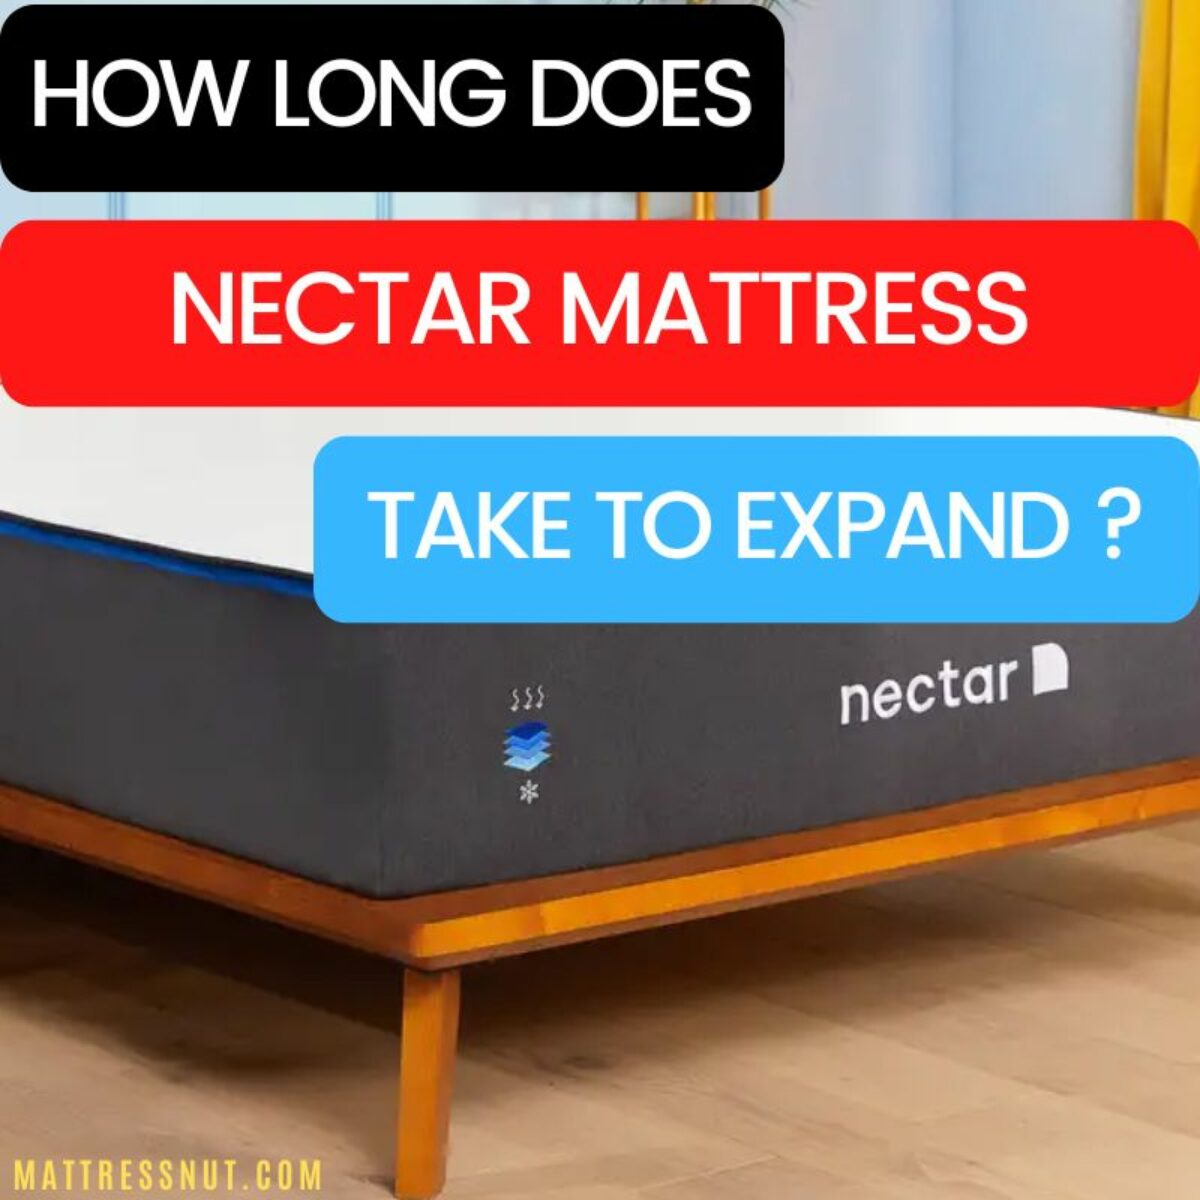 How Long Should I Let My Nectar Mattress Expand?